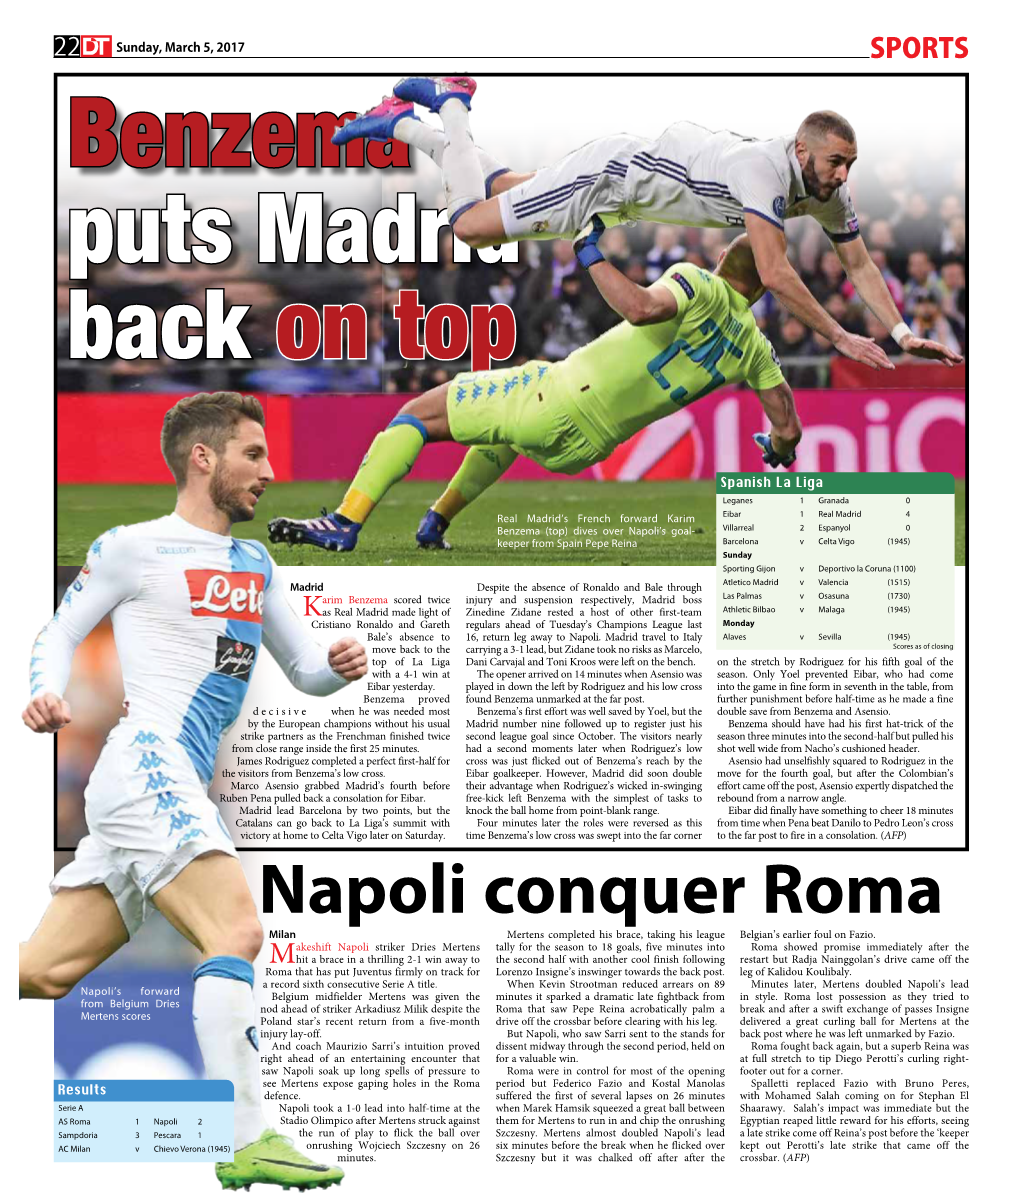 Napoli Conquer Roma Milan Mertens Completed His Brace, Taking His League Belgian’S Earlier Foul on Fazio